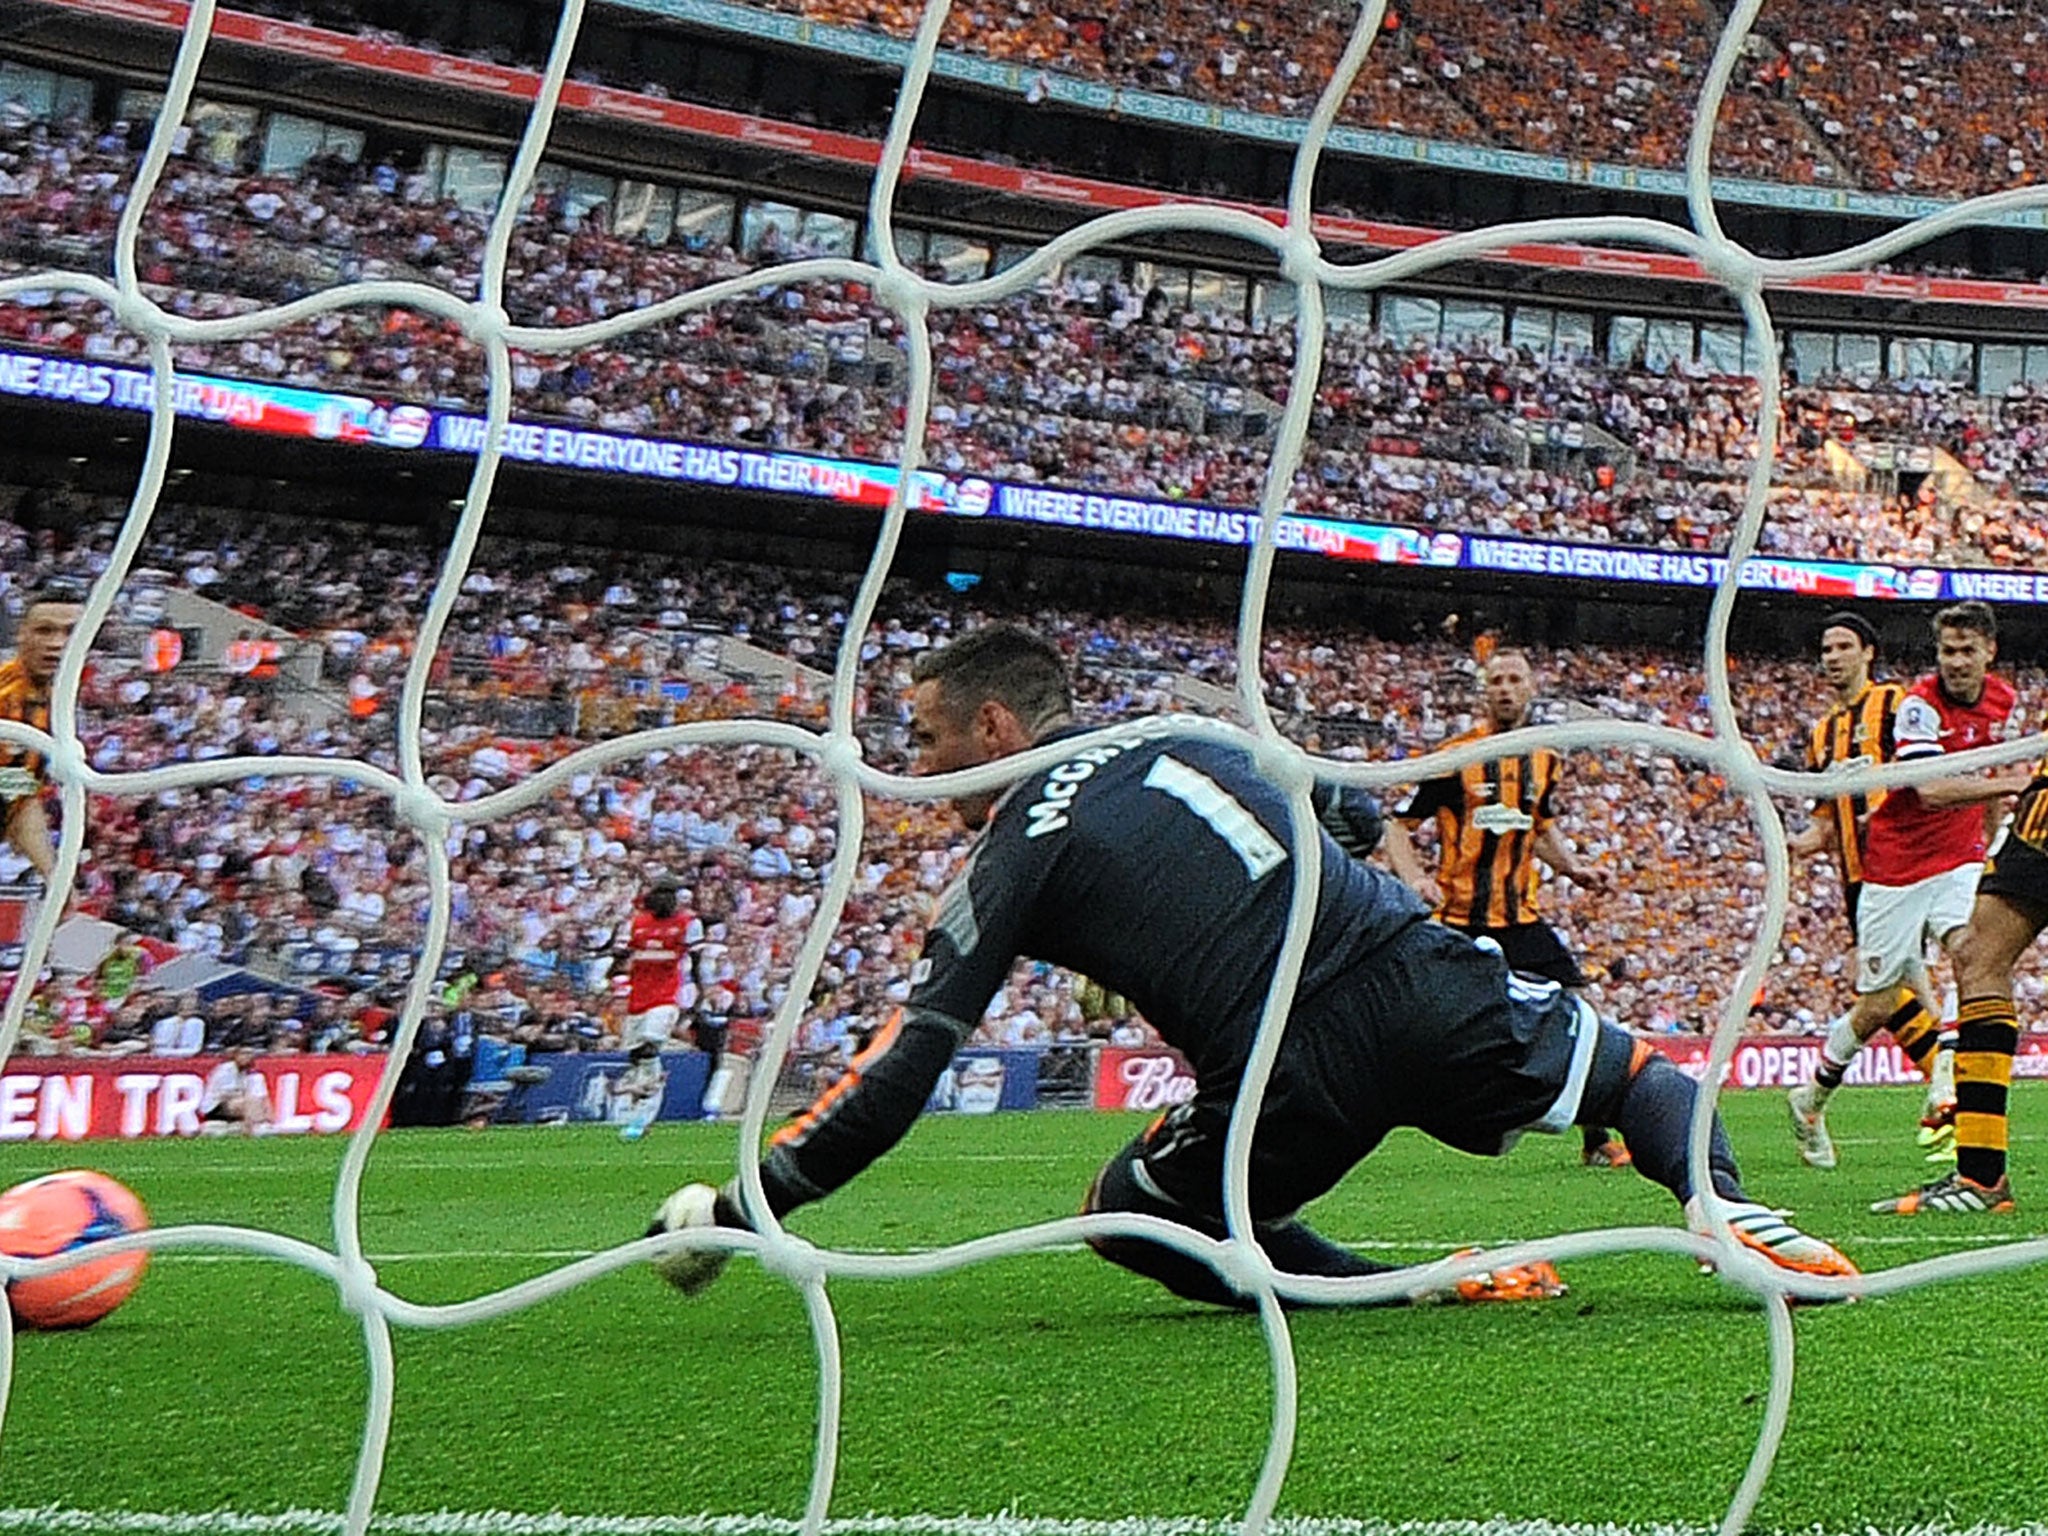 Aaron Ramsey scores Arsenal’s winner against Hull City in last season’s FA Cup final at Wembley